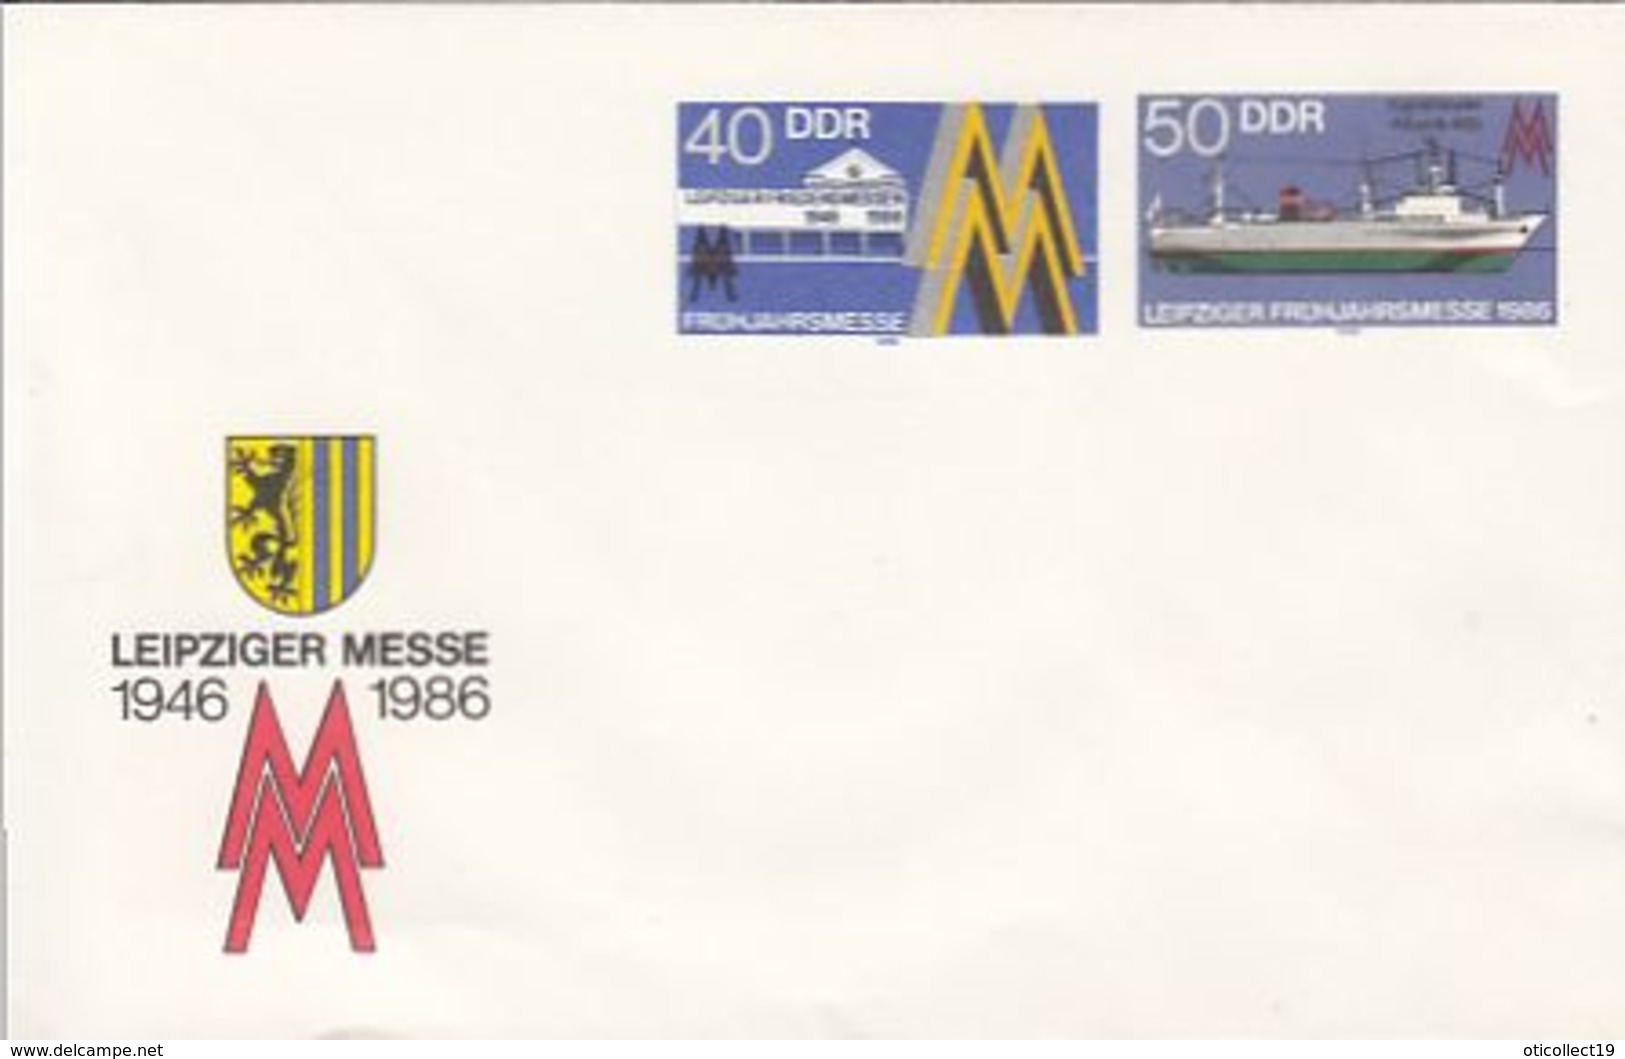 LEIPZIG FAIR, COAT OF ARMS, SHIPP, COVER STATIONERY, 1986, GERMANY-DDR - Covers - Mint